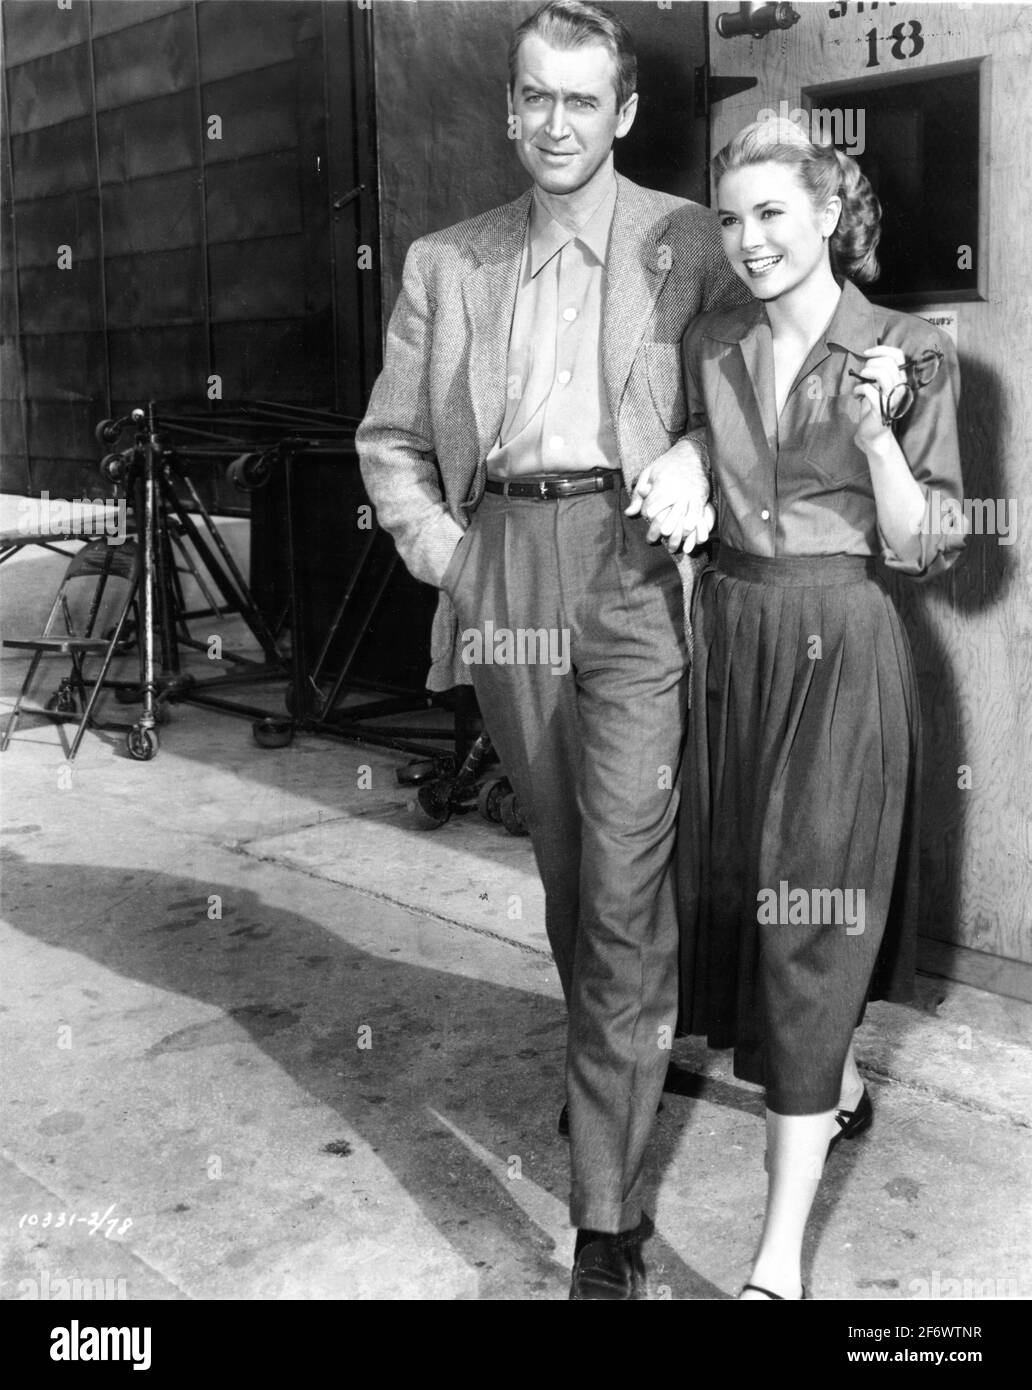 JAMES STEWART and GRACE KELLY on set candid during filming of REAR WINDOW 1954 director ALFRED HITCHCOCK screenplay John Michael Hayes based on a short story by Cornell Woolrich Alfred J. Hitchcock Productions / Paramount Pictures Stock Photo